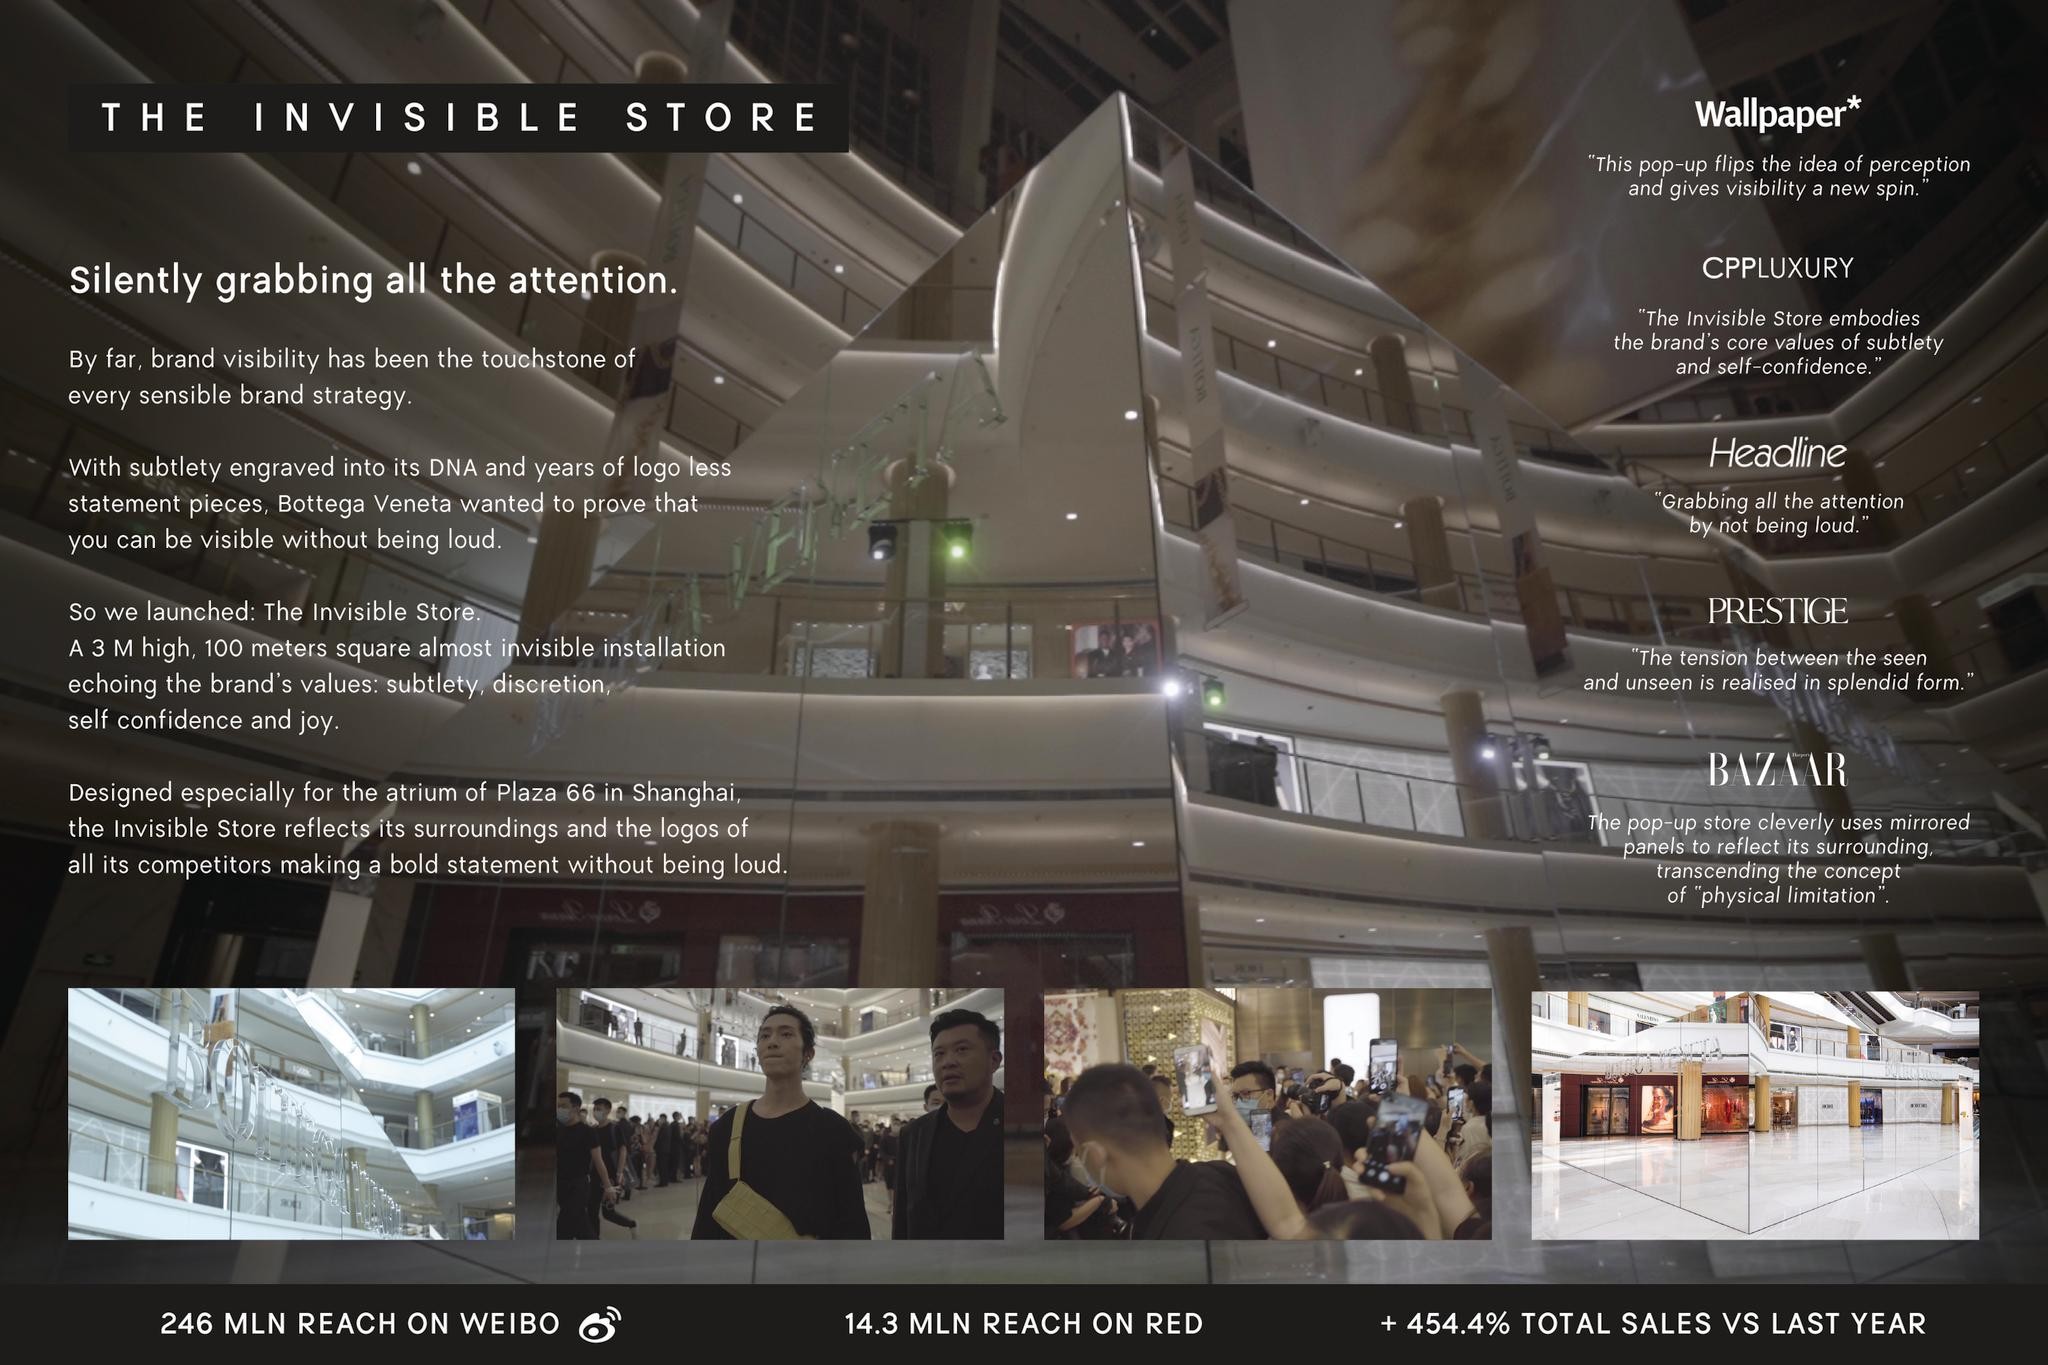 THE INVISIBLE STORE